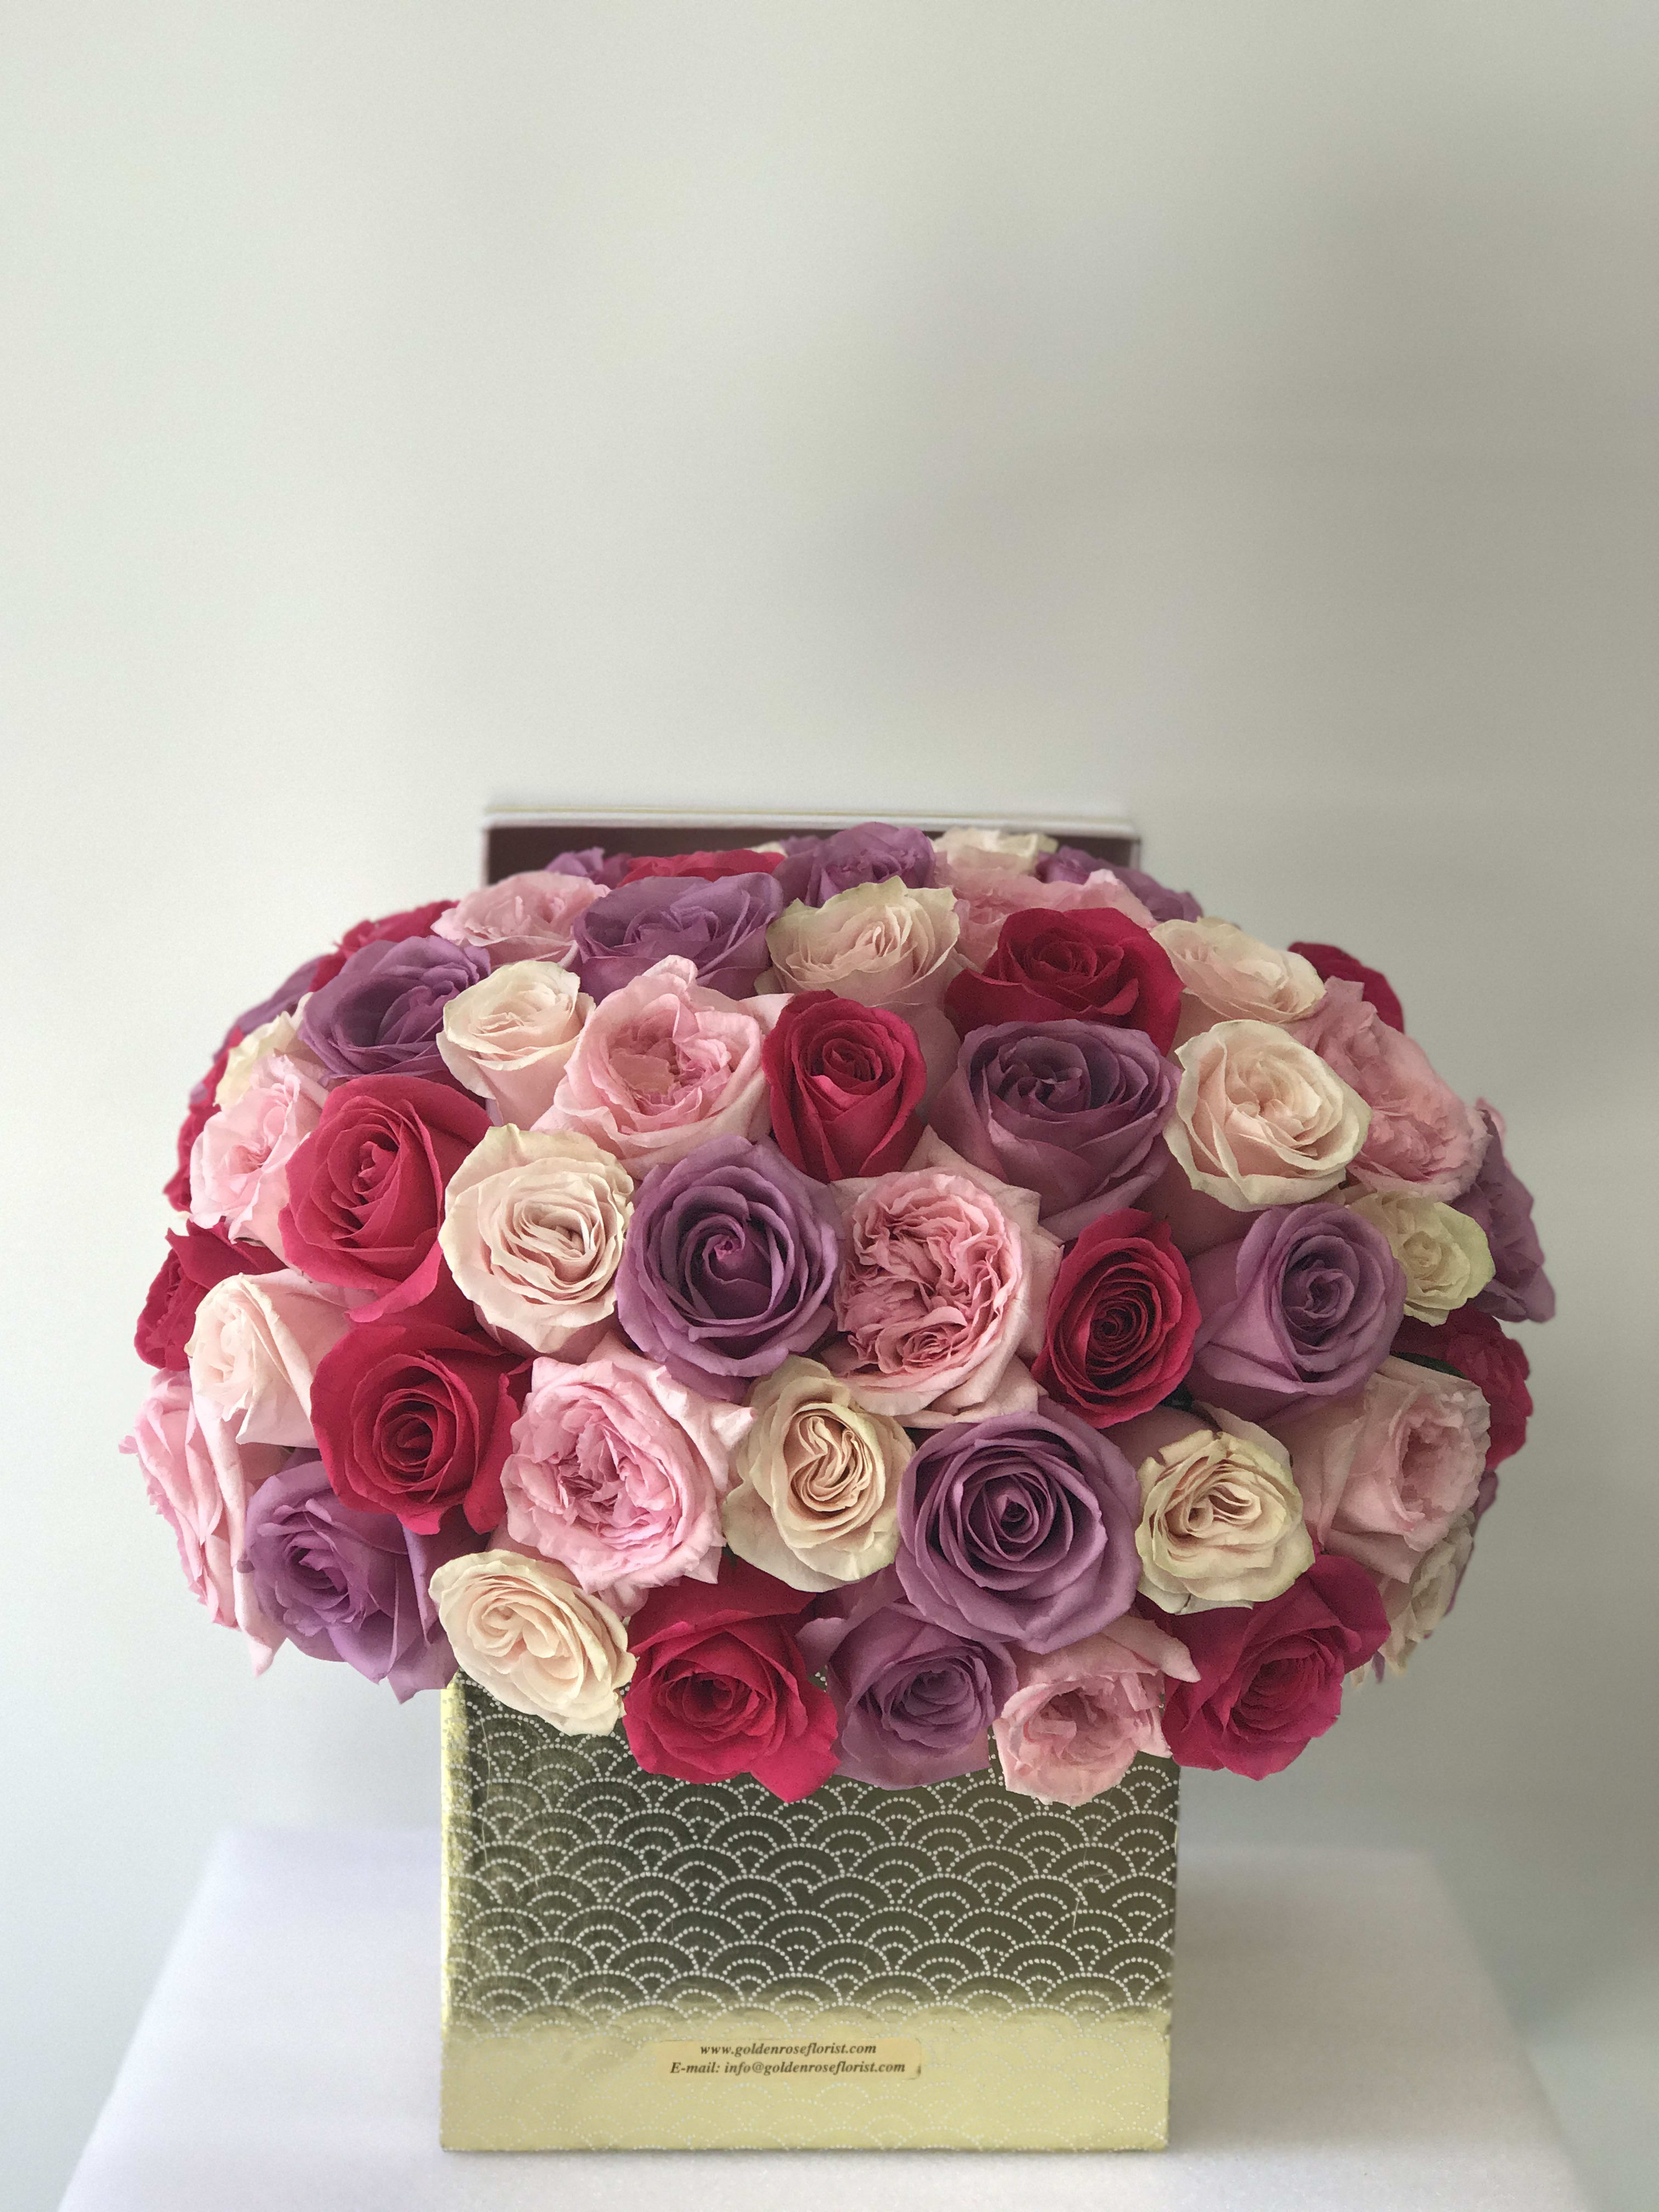 Cod. 1327 - 75 Stems Ecuadorian  Roses Box AS SIMILAR AS POSSIBLE Substitution based on season, flowers availability or any unforeseen or uncontrollable circumstances 